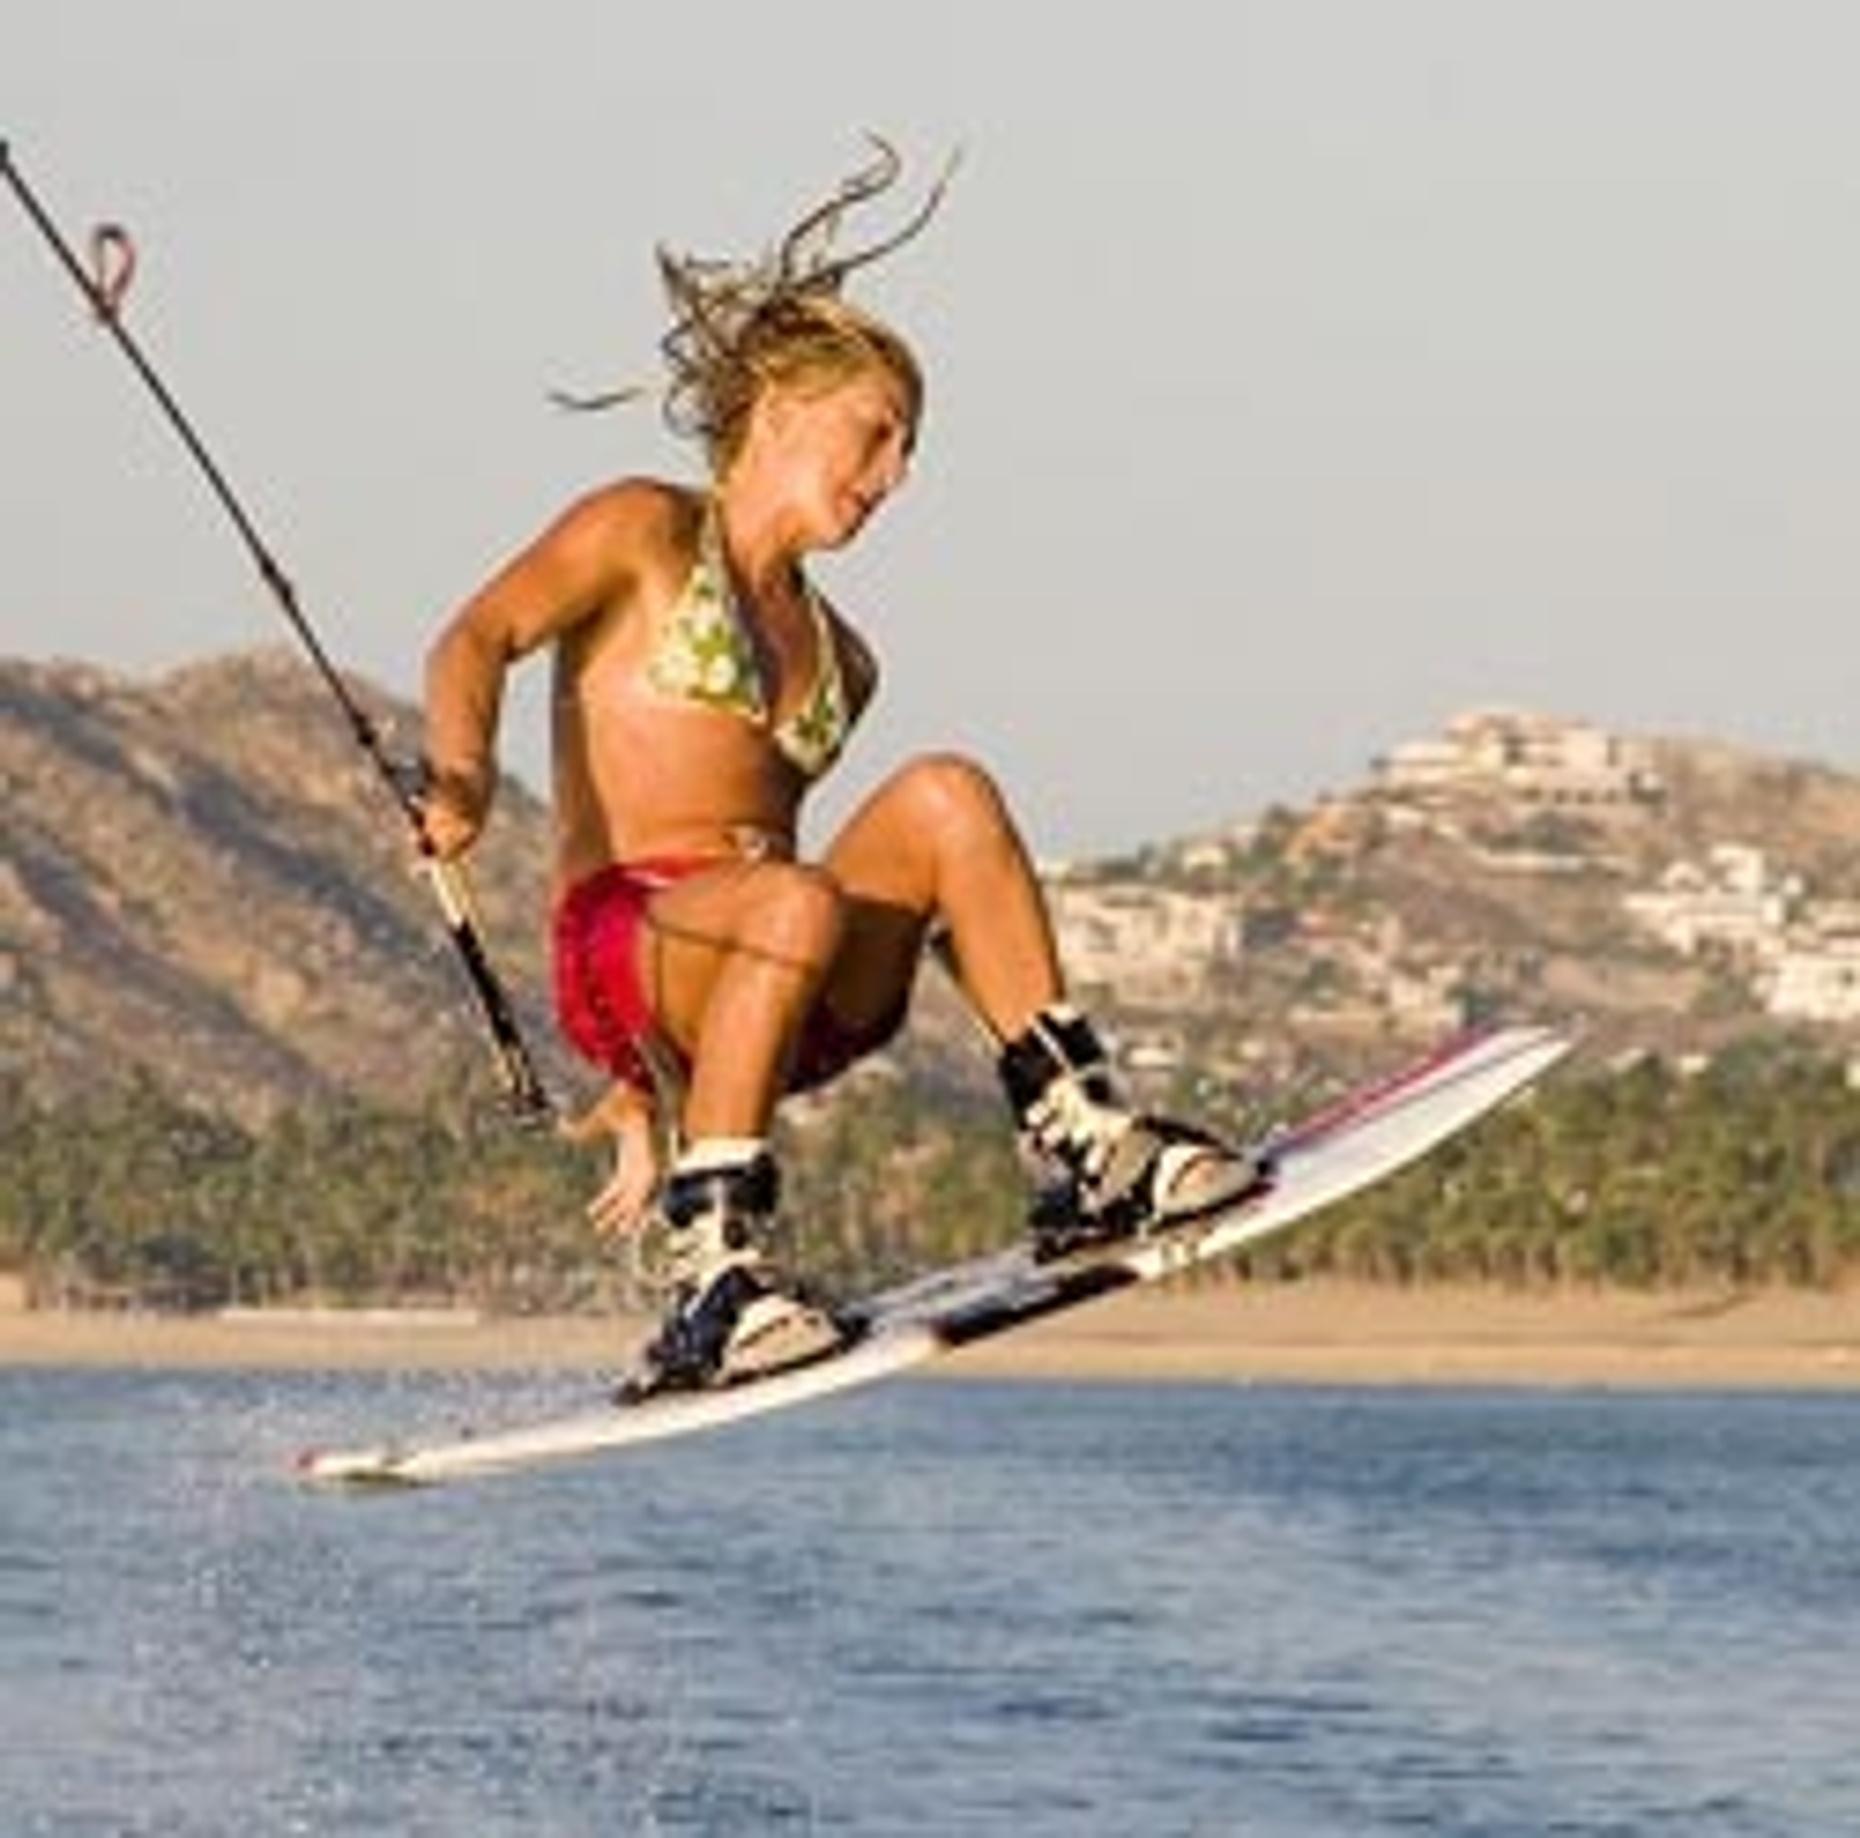 Wakeboarding Adventure in Cabo San Lucas